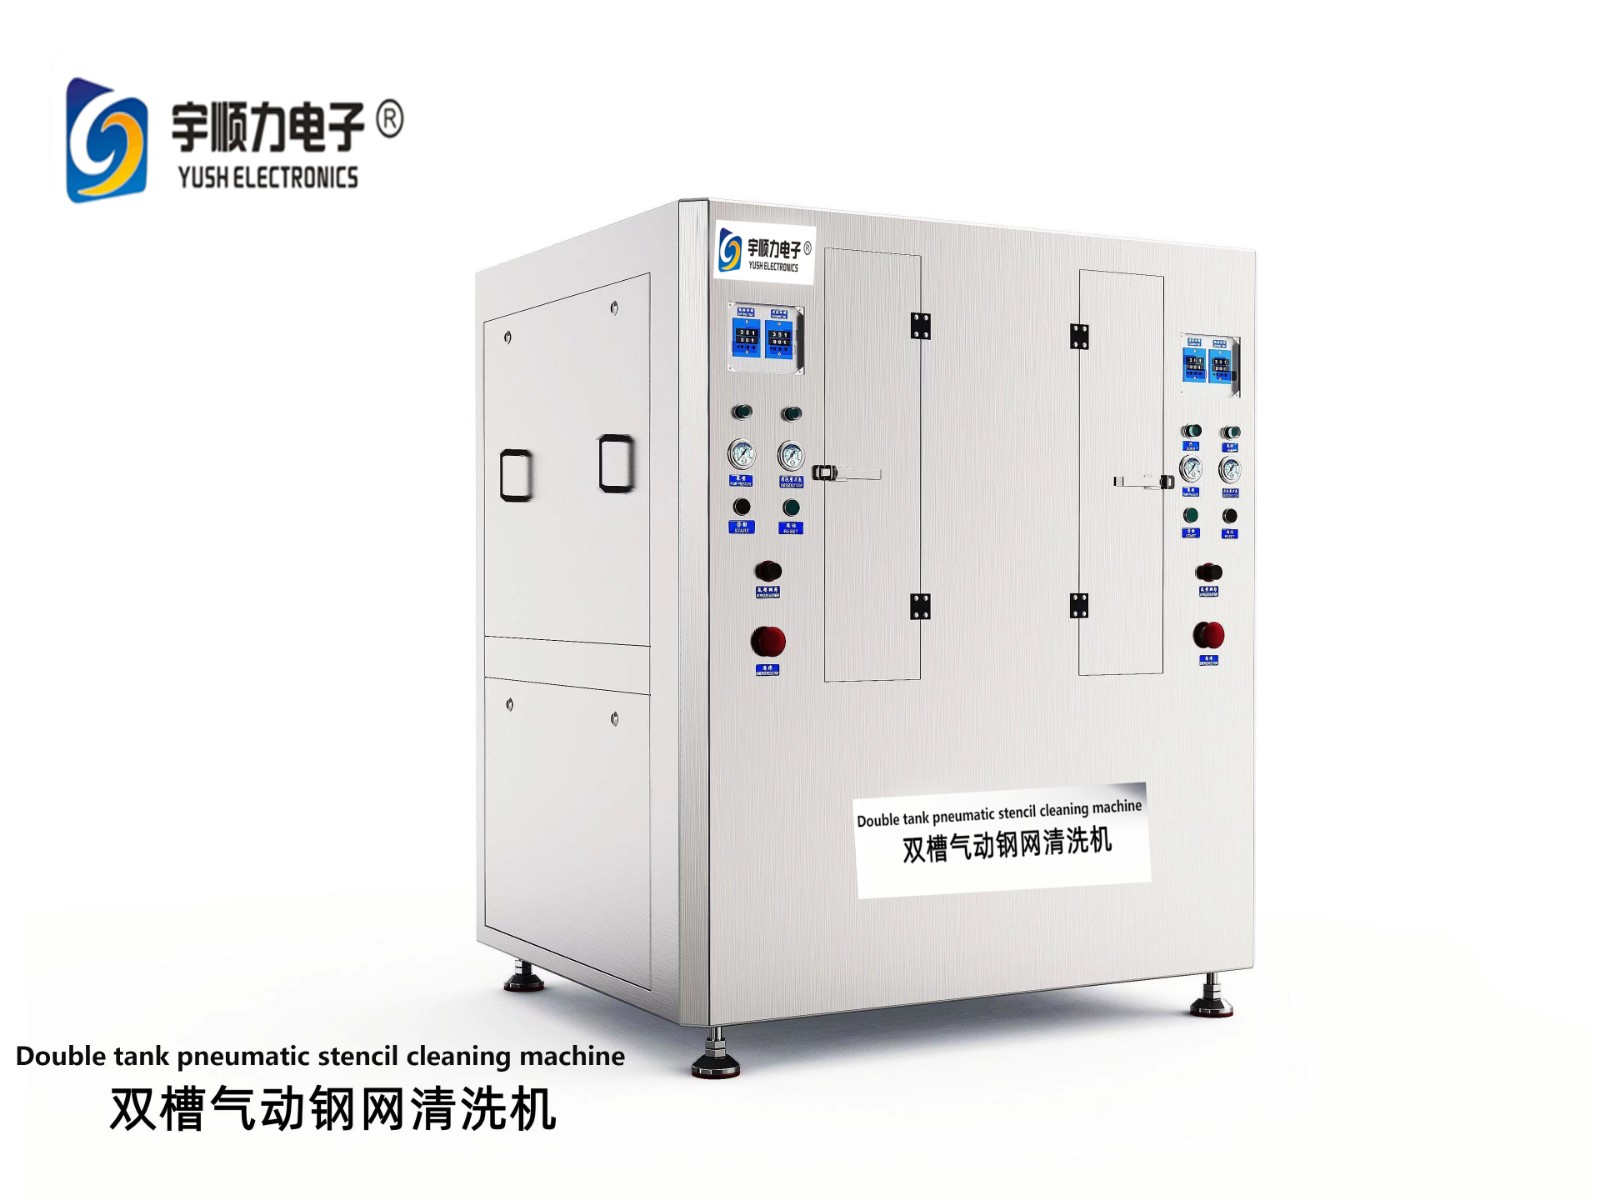 Double tank Pneumatic Stencil Cleaning machine with Stainless steelYUSHUNLI